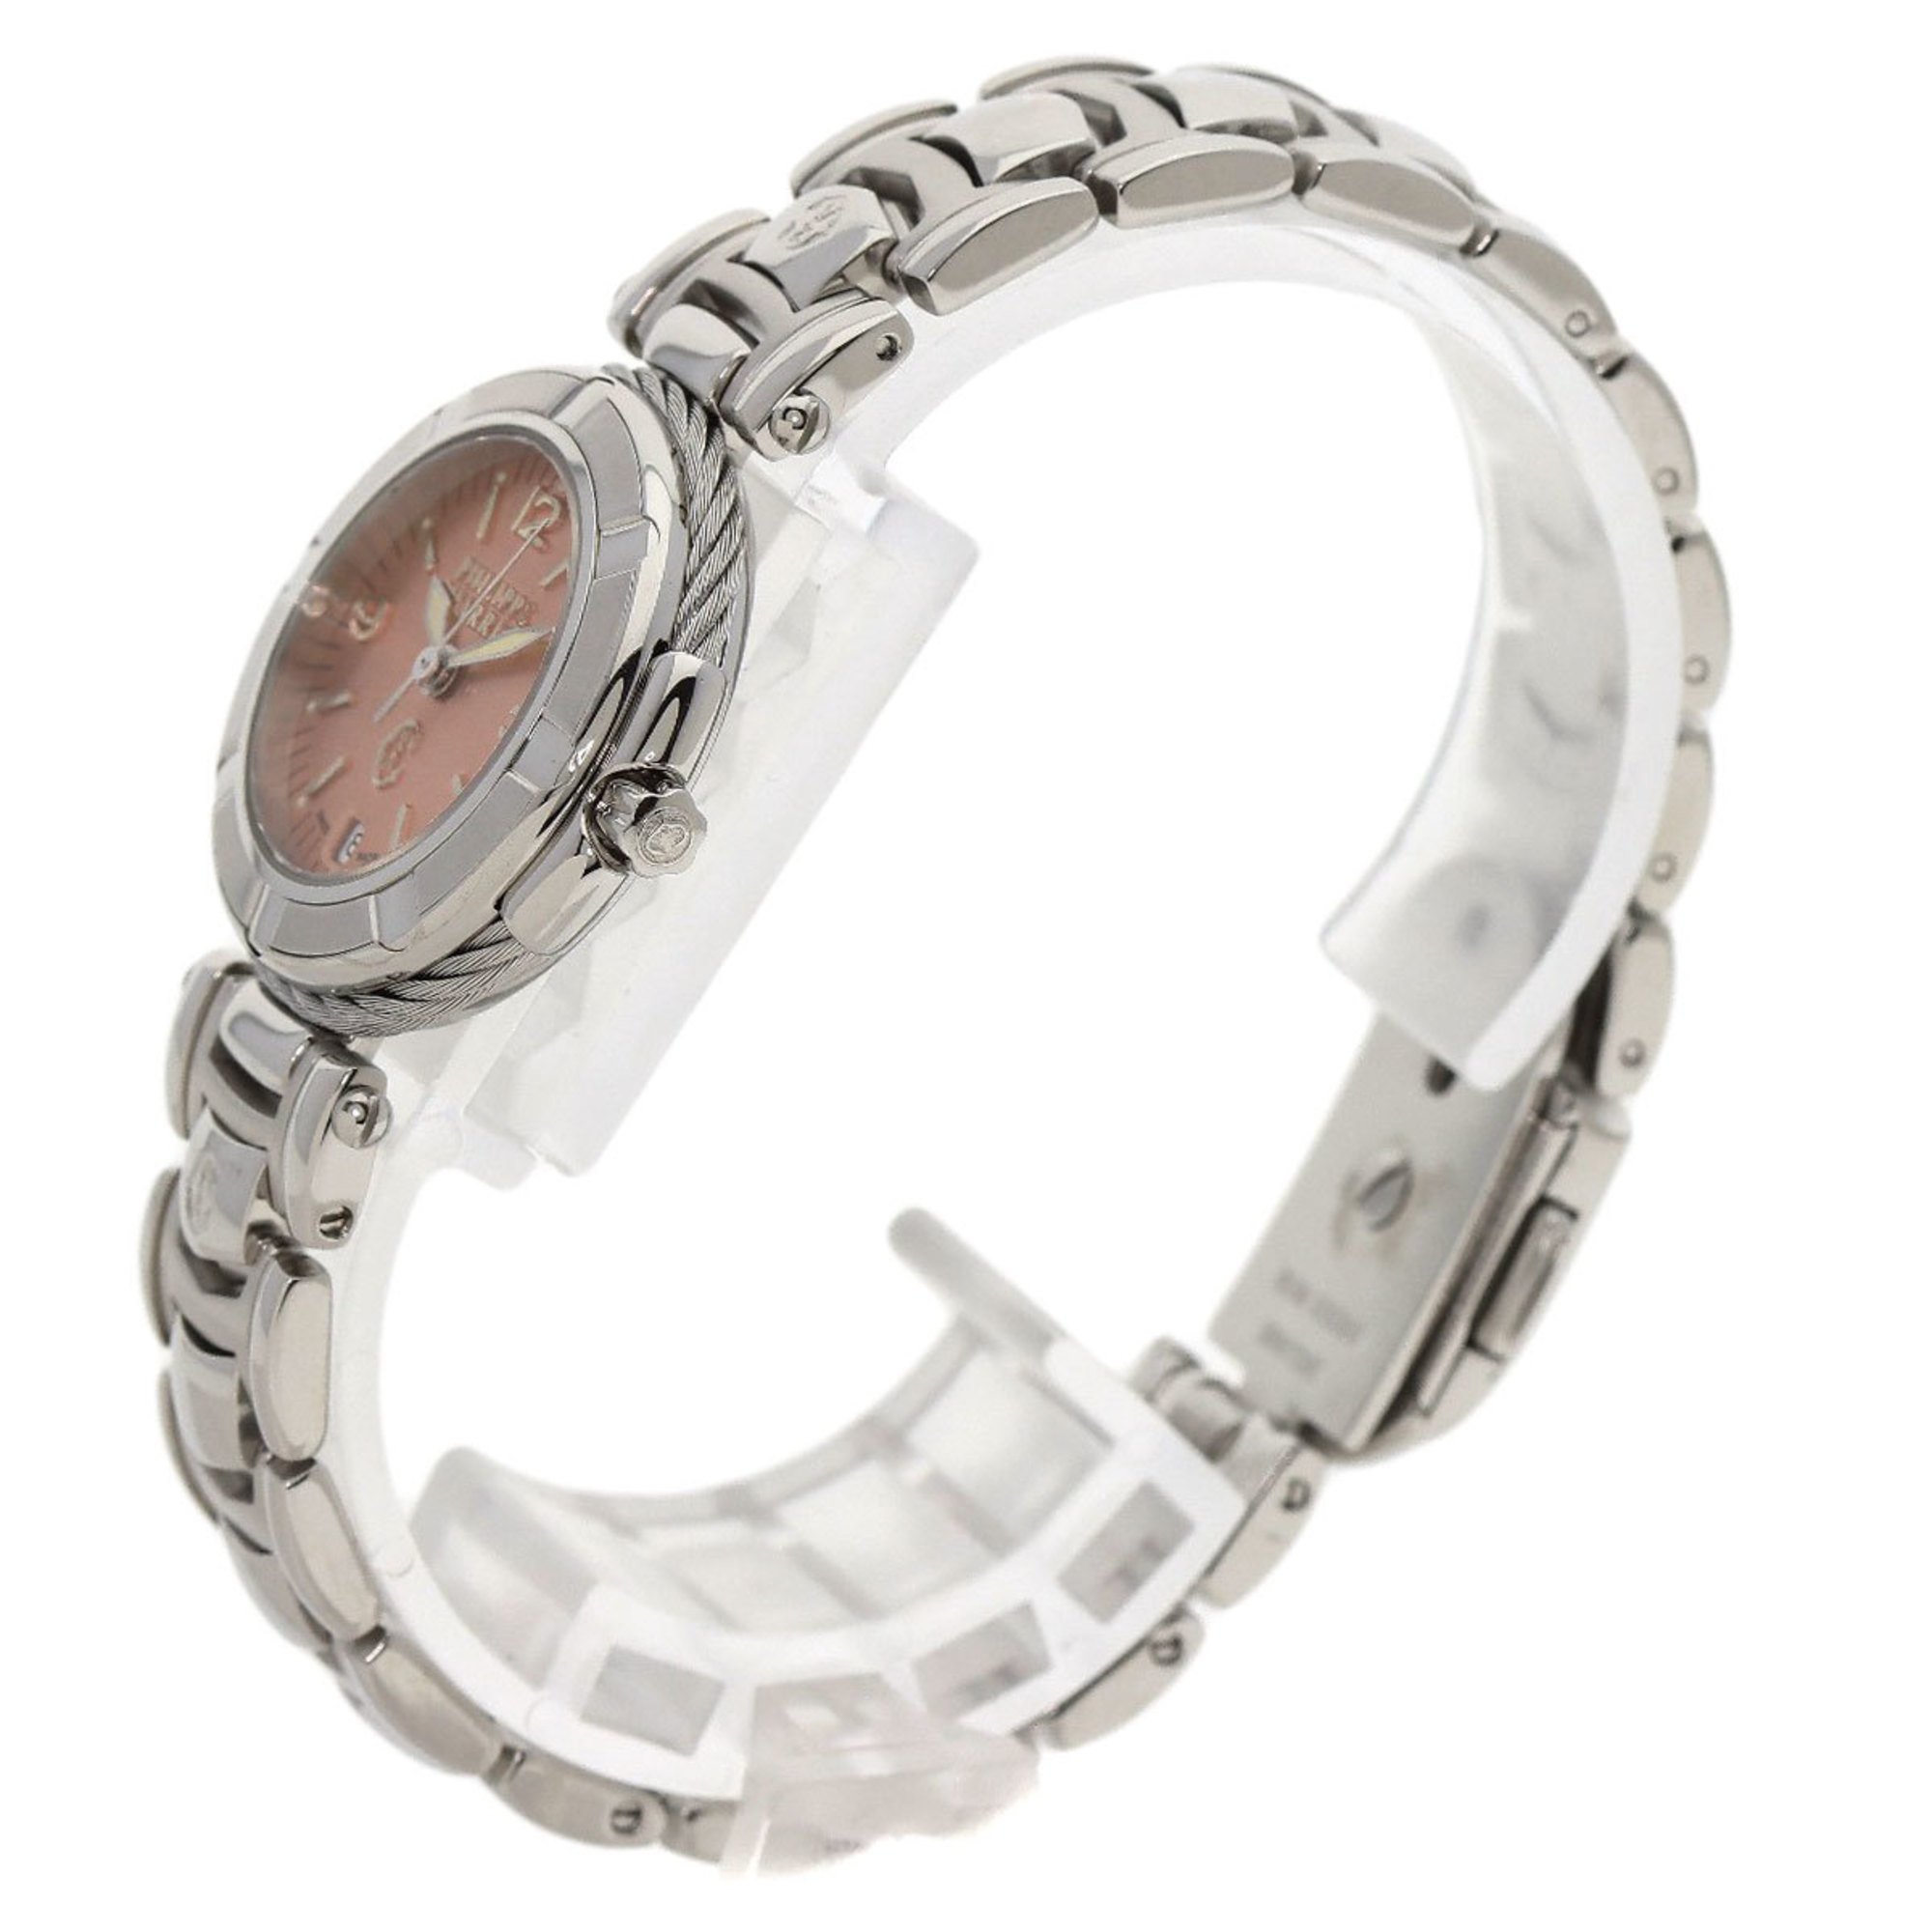 Philippe Charriol 53.97.2617 Celtic Watch Stainless Steel/SS Ladies PHILIPPE CHARRIOL